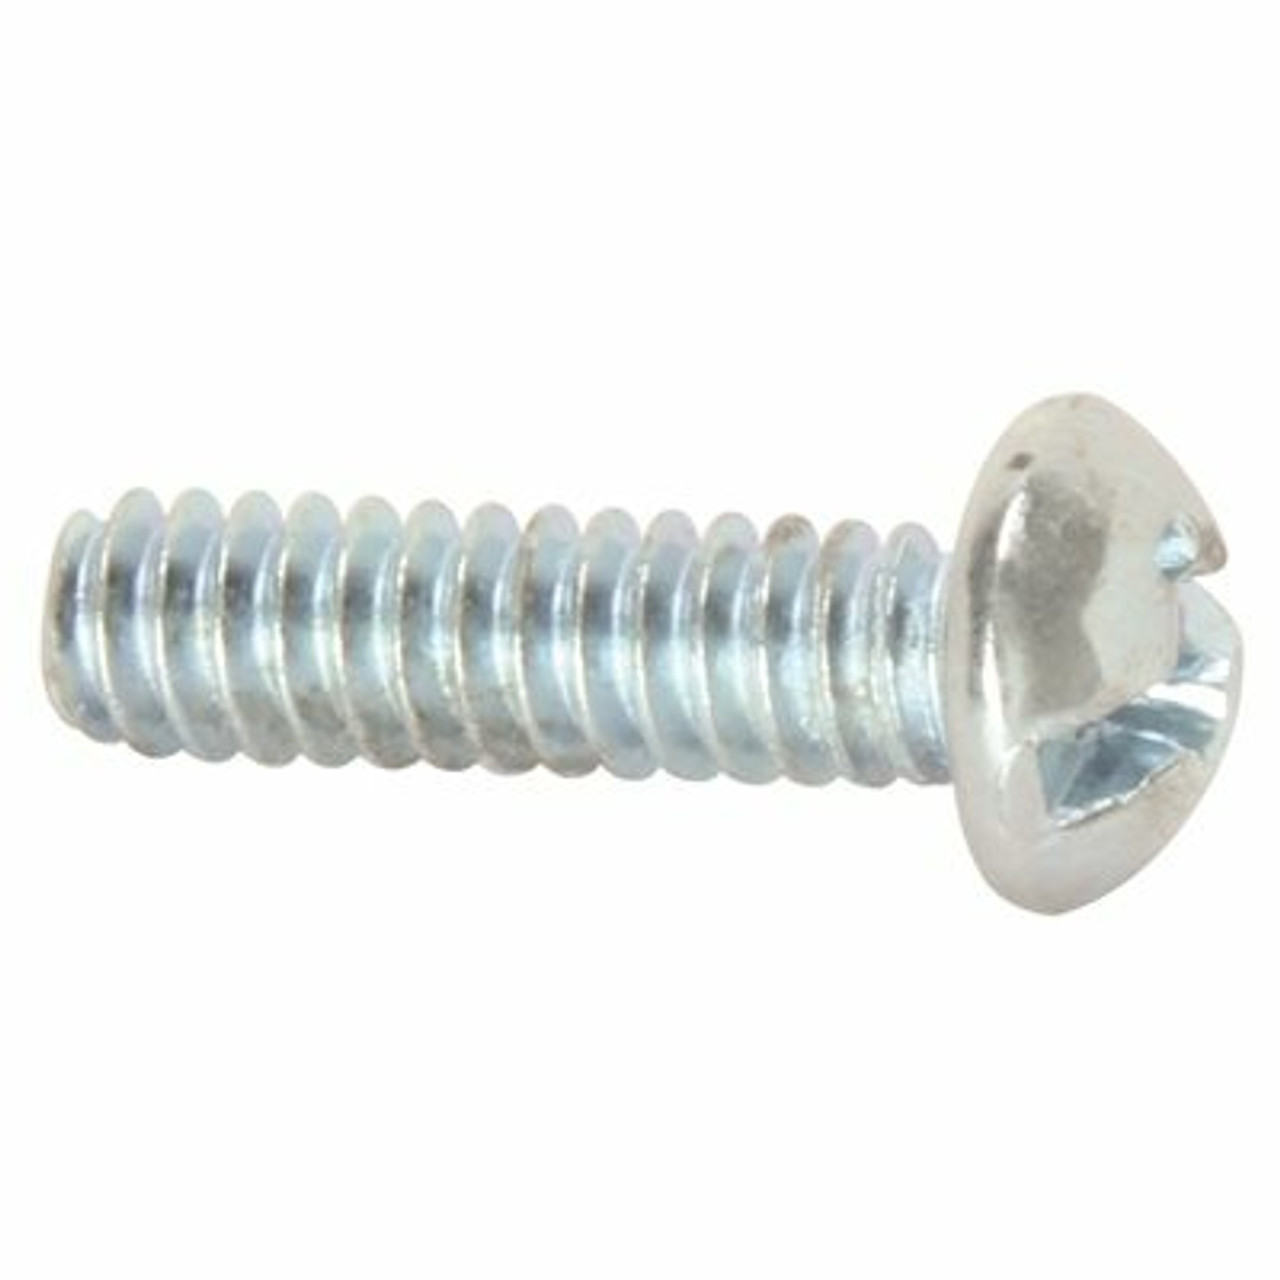 Lindstrom #6-32 Tpi X 1-1/4 In. Combo Phillips/Slotted Round Machine Screws (100 Per Pack)